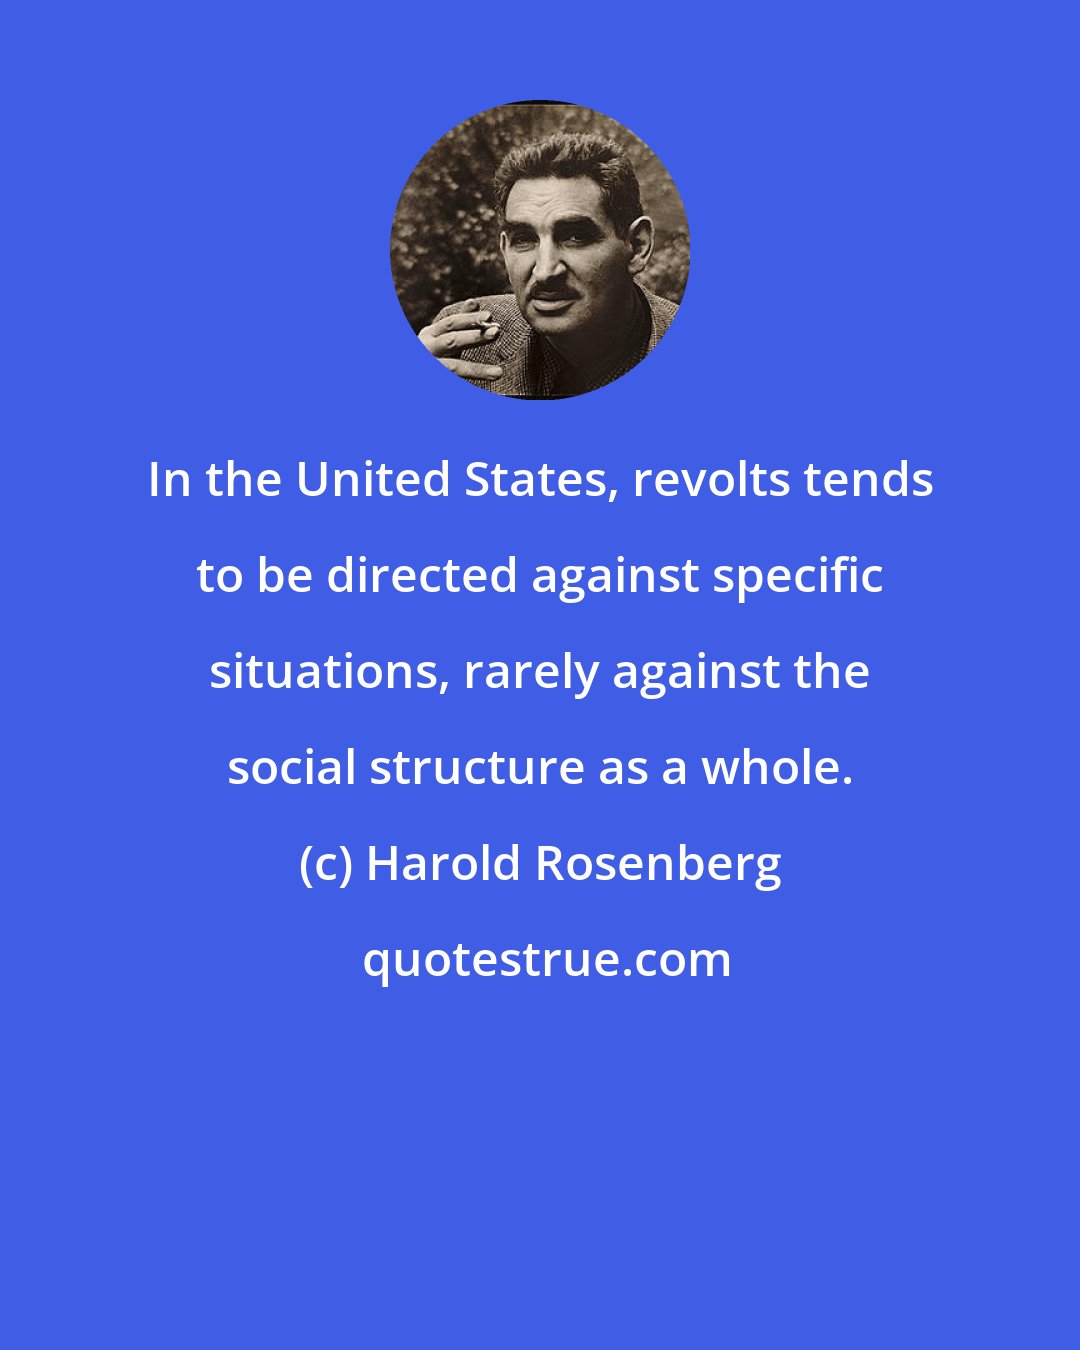 Harold Rosenberg: In the United States, revolts tends to be directed against specific situations, rarely against the social structure as a whole.